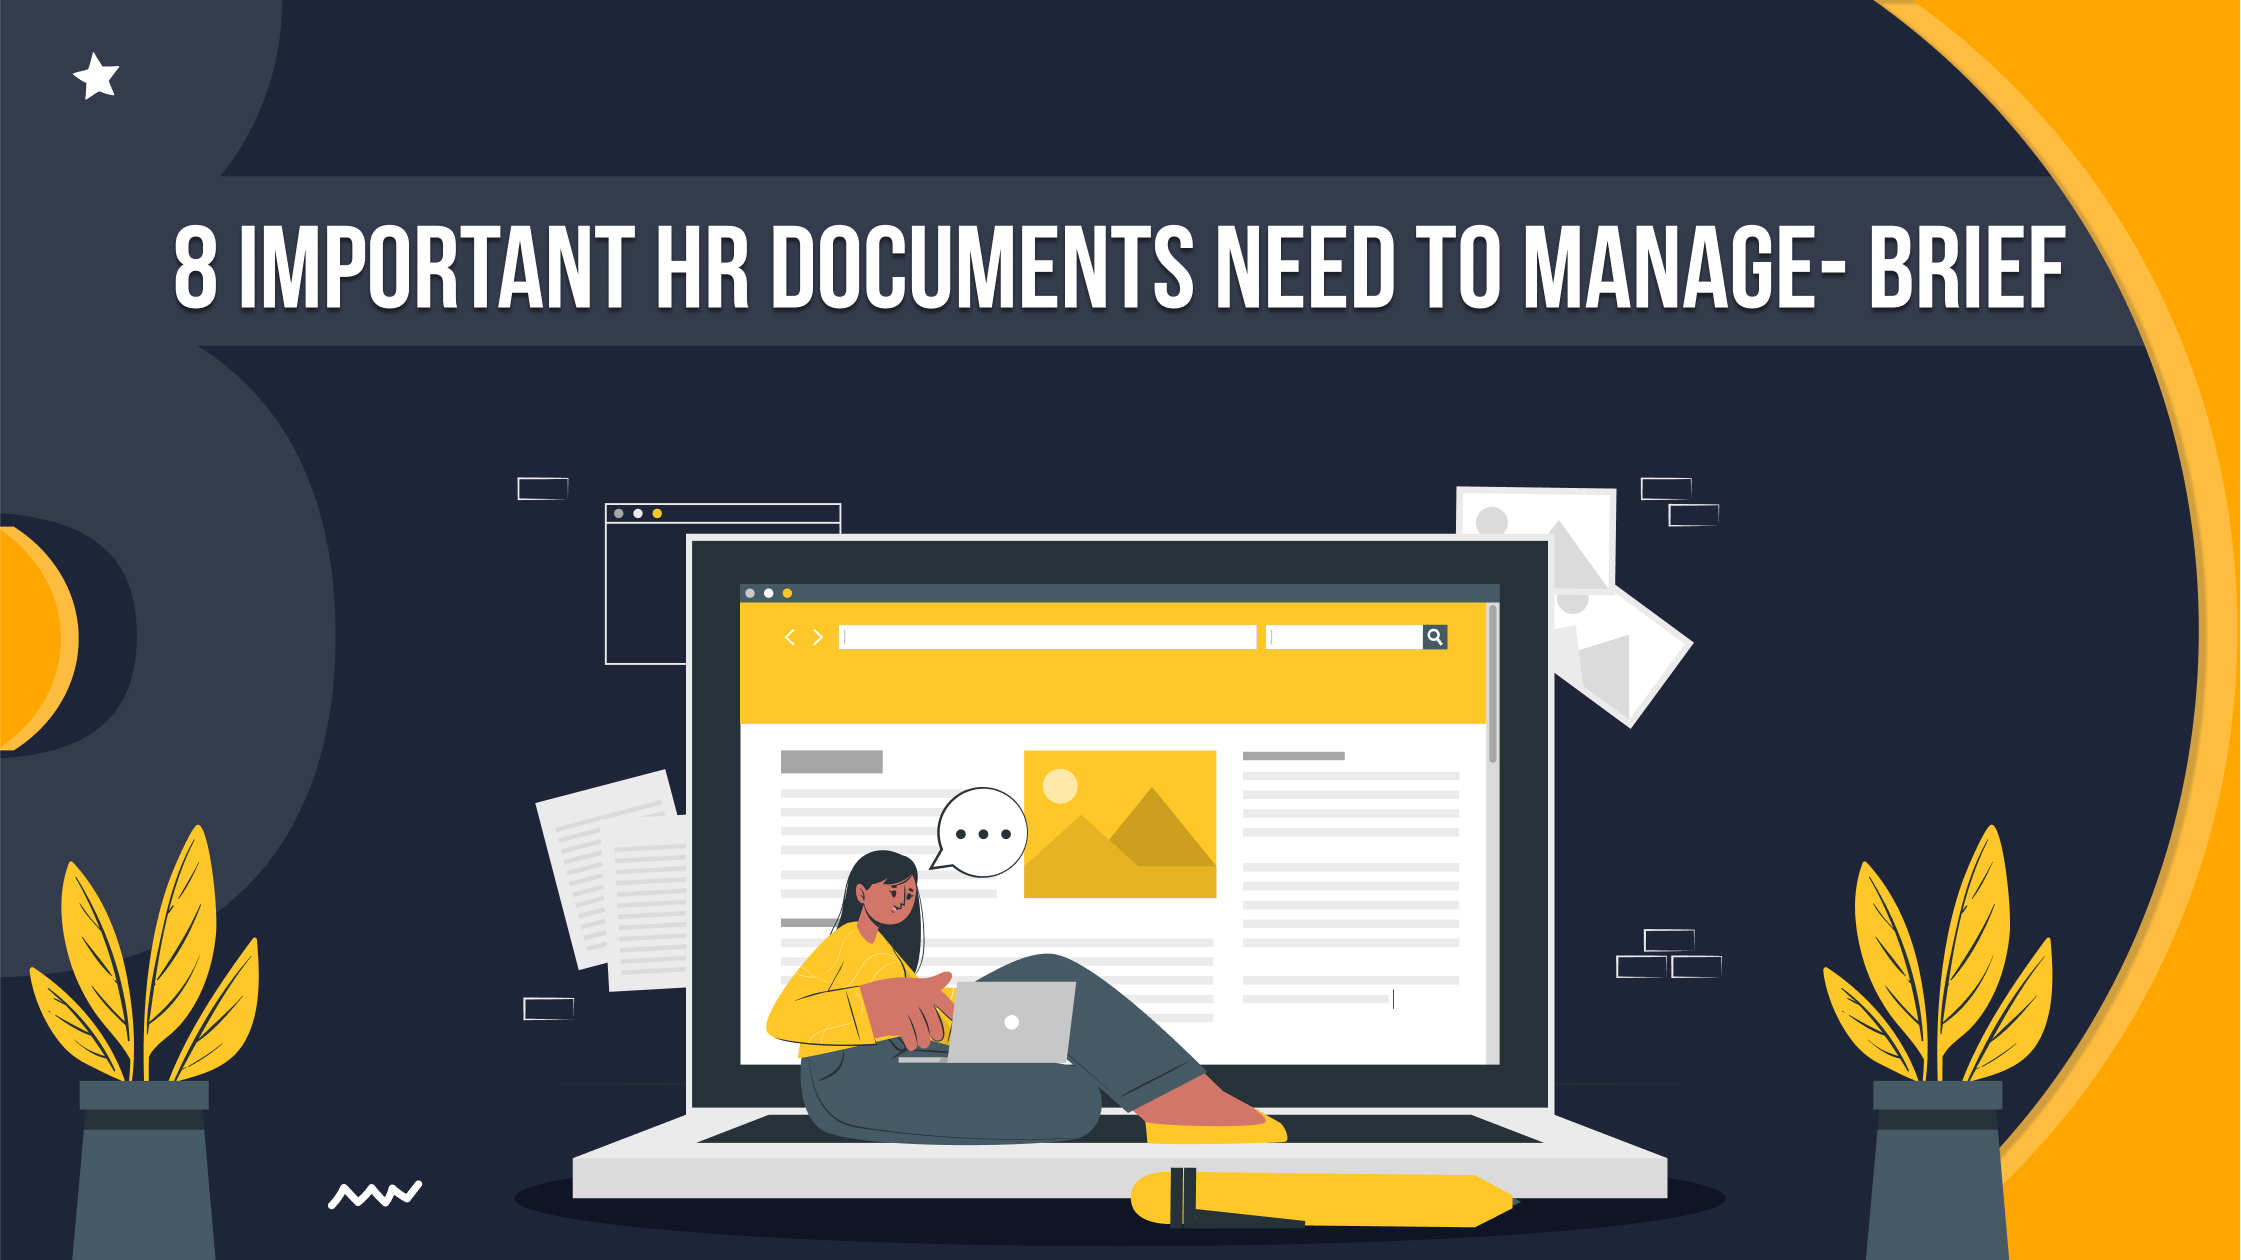 8 Important HR Documents Need to Manage Brief